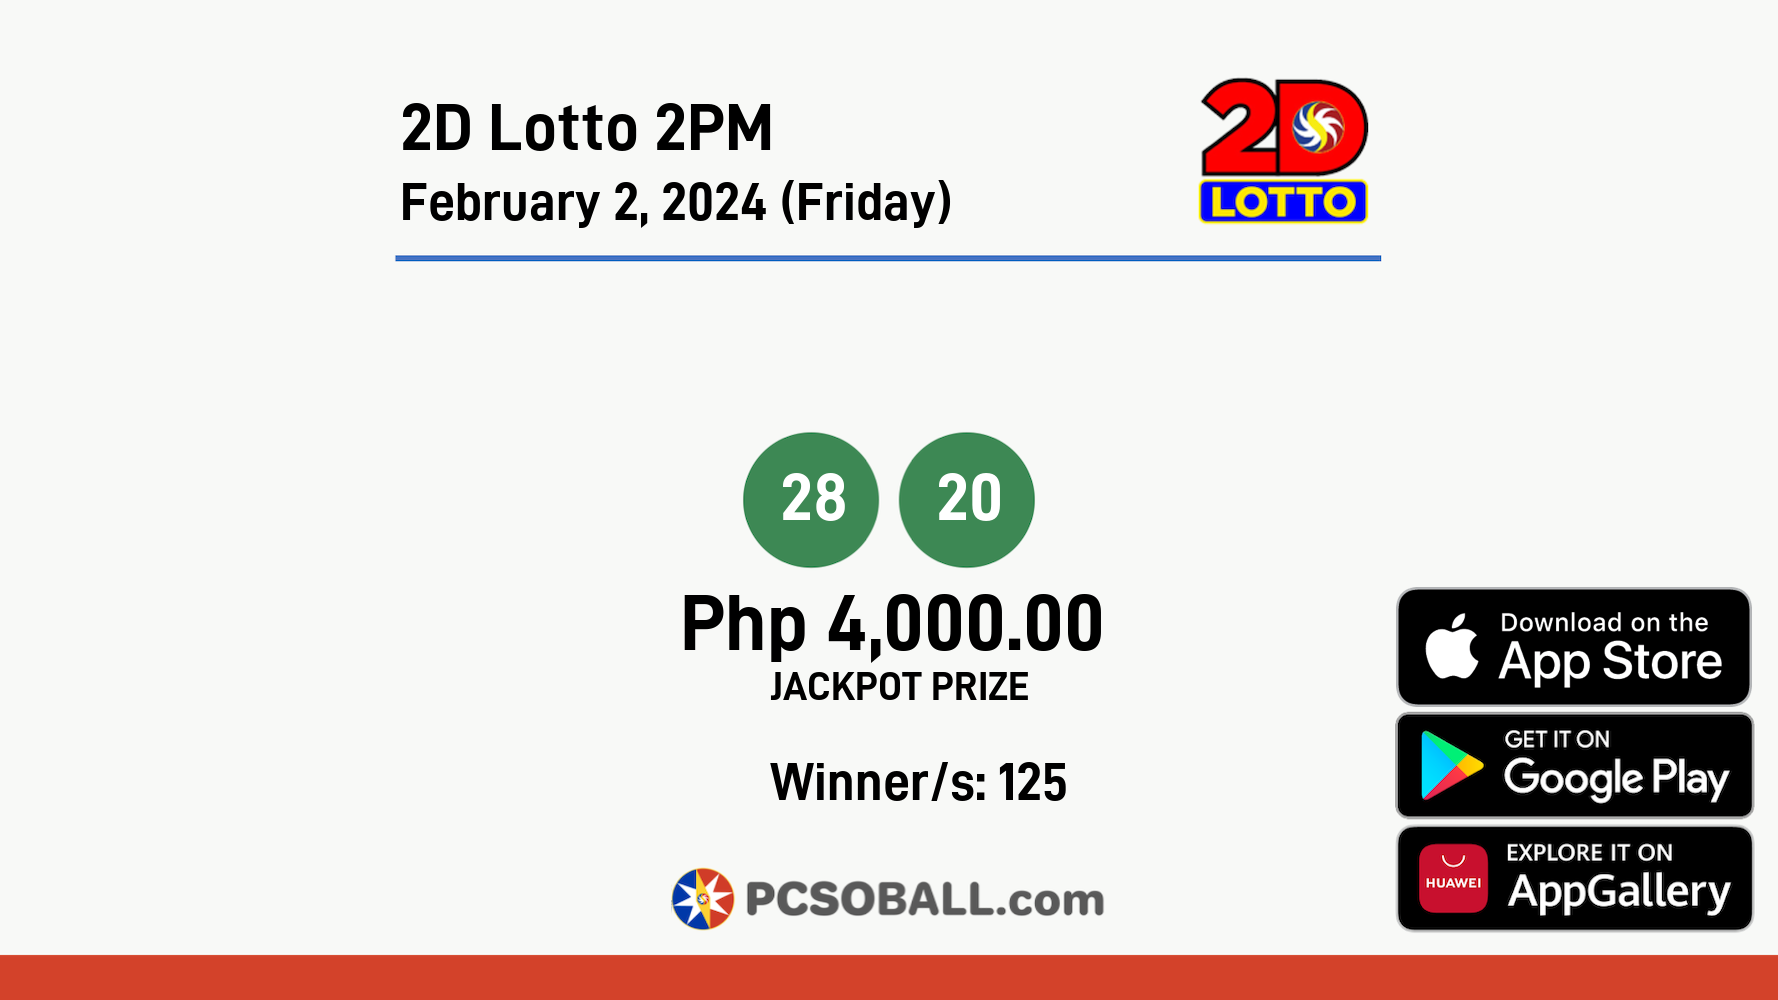 2D Lotto 2PM February 2, 2024 (Friday) Result